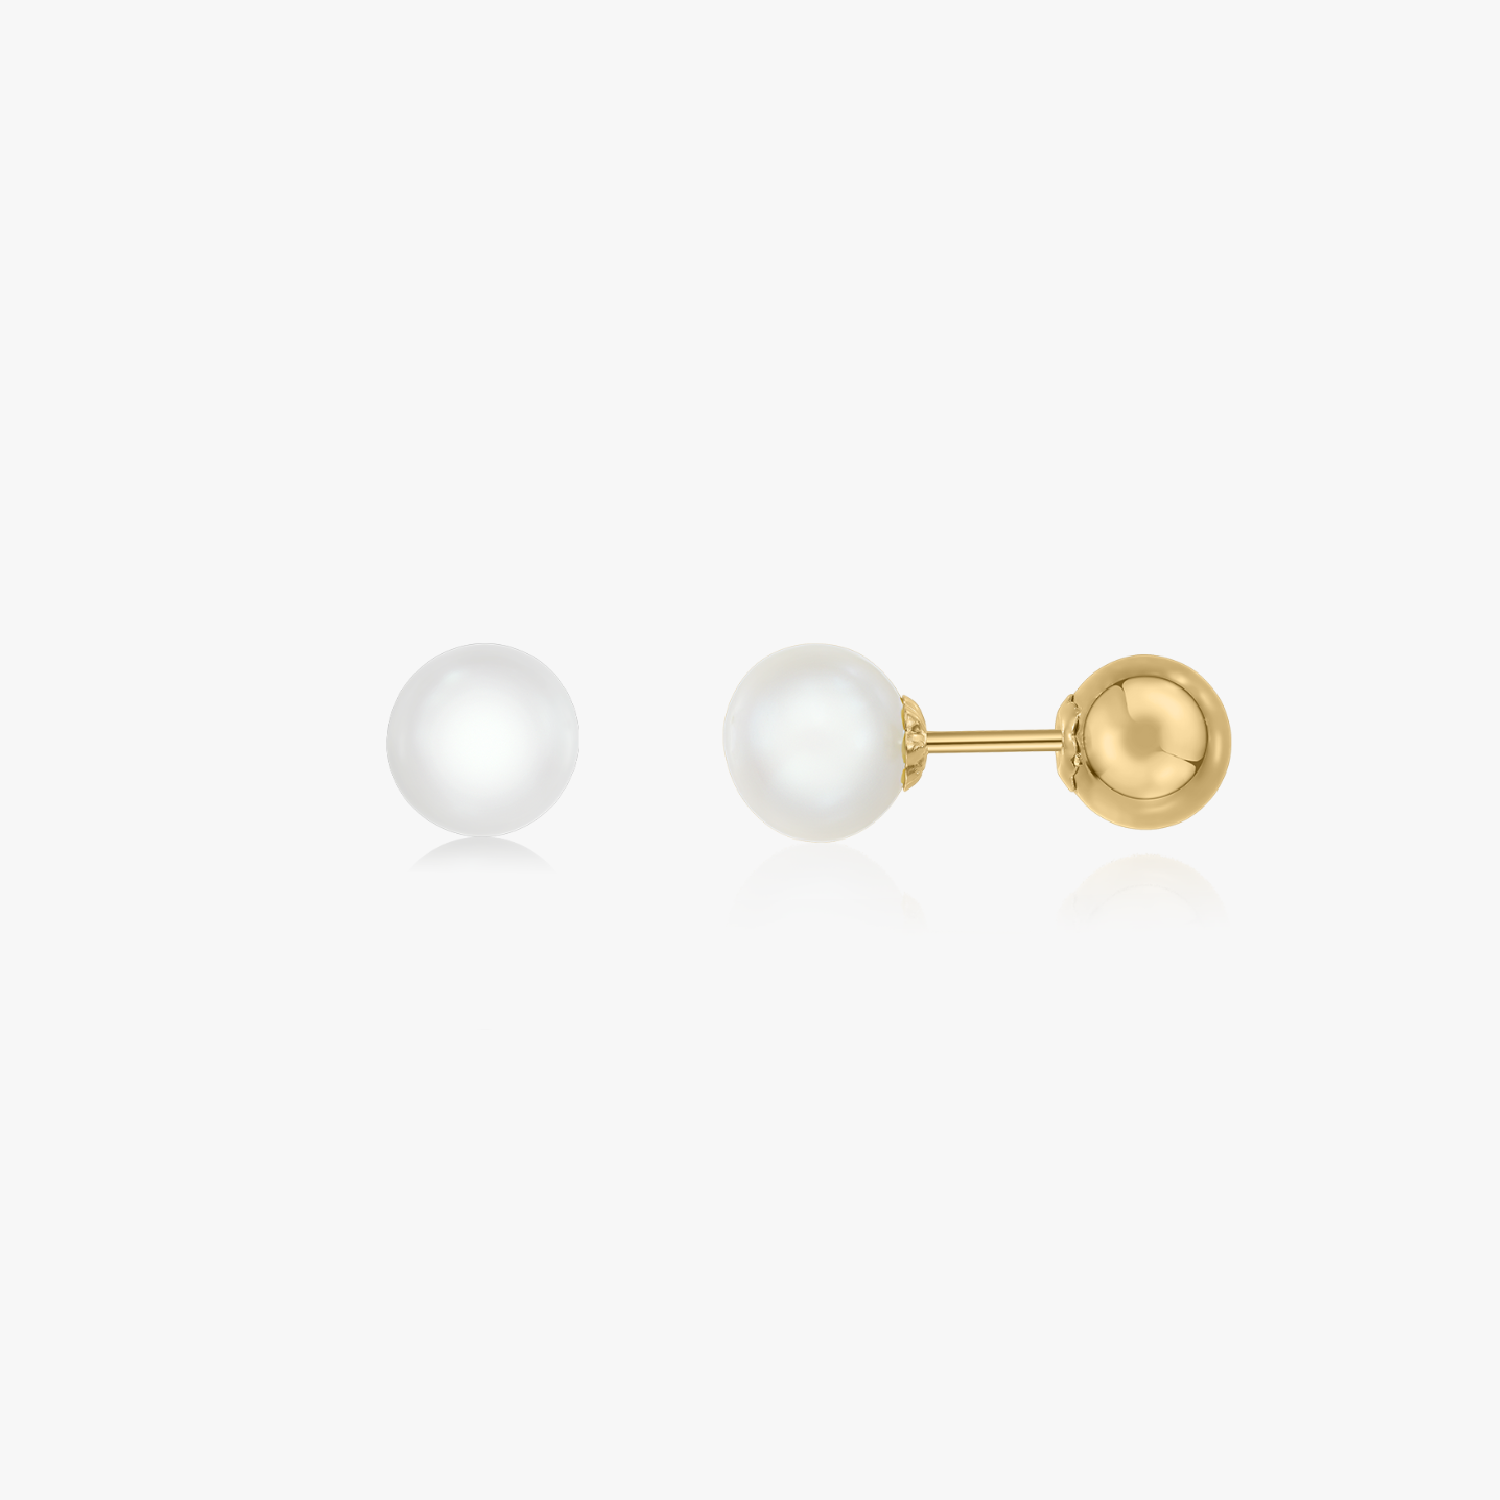 Golden Reverse Silver Earrings - Natural Pearls